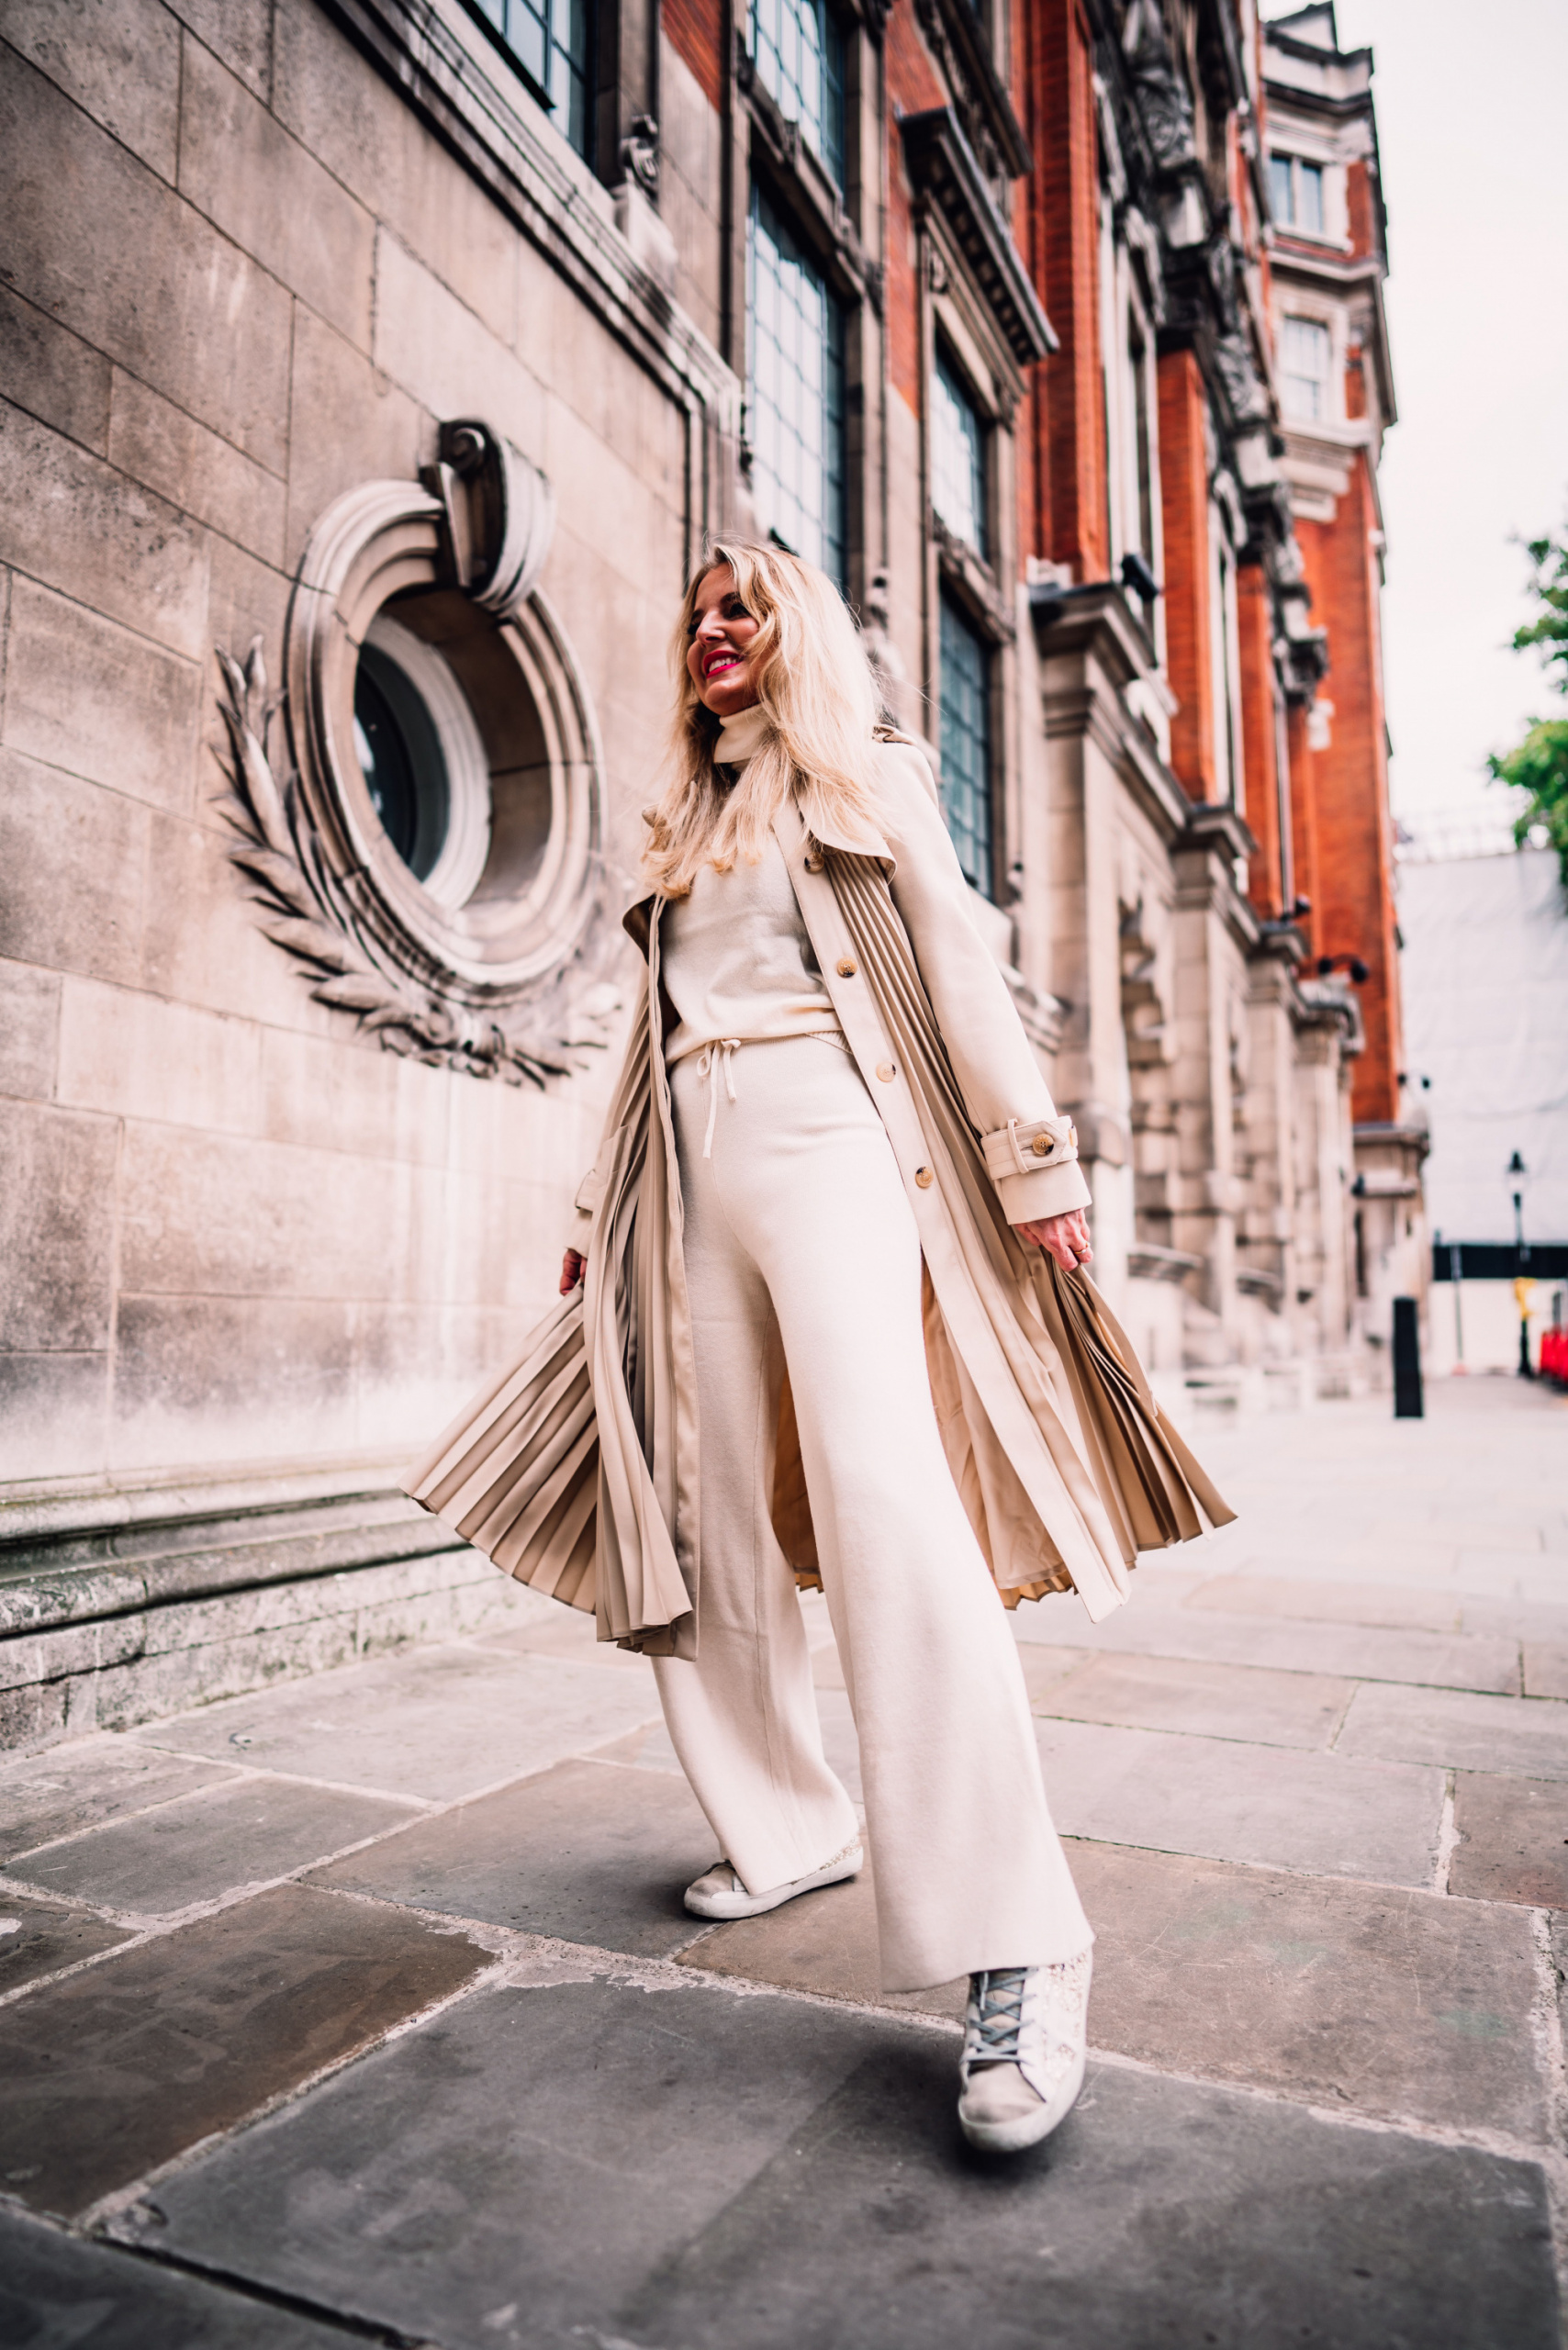 Sandro trench, why a chic trench coat belongs in every woman's closet, wardrobe basics, trench coats women over 40, trench coat outfits, erin busbee